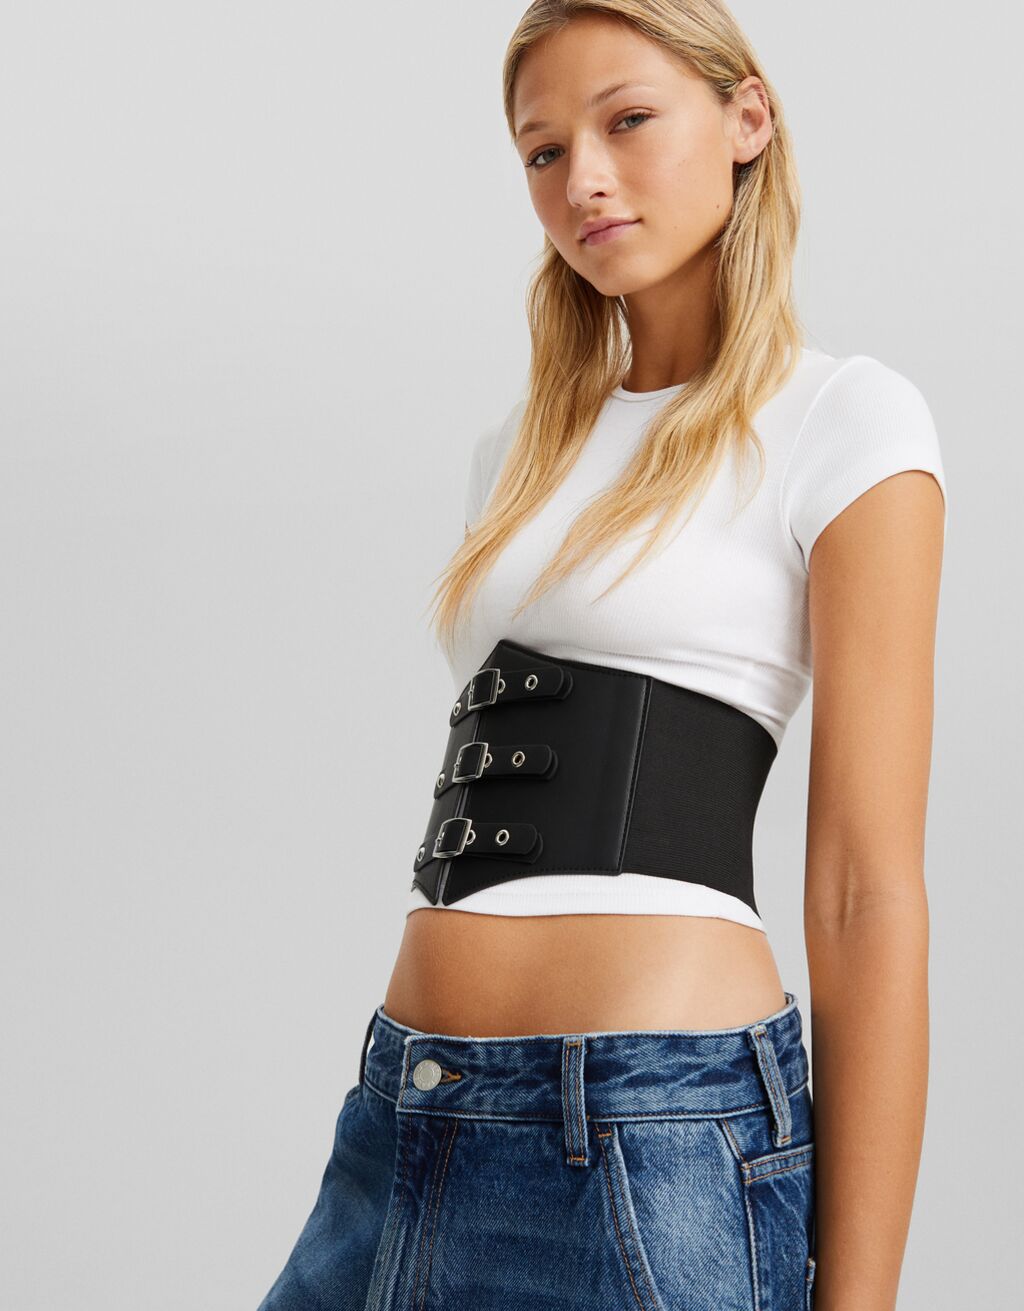 Buckle corset - Promotion up to 40% off - BSK Teen